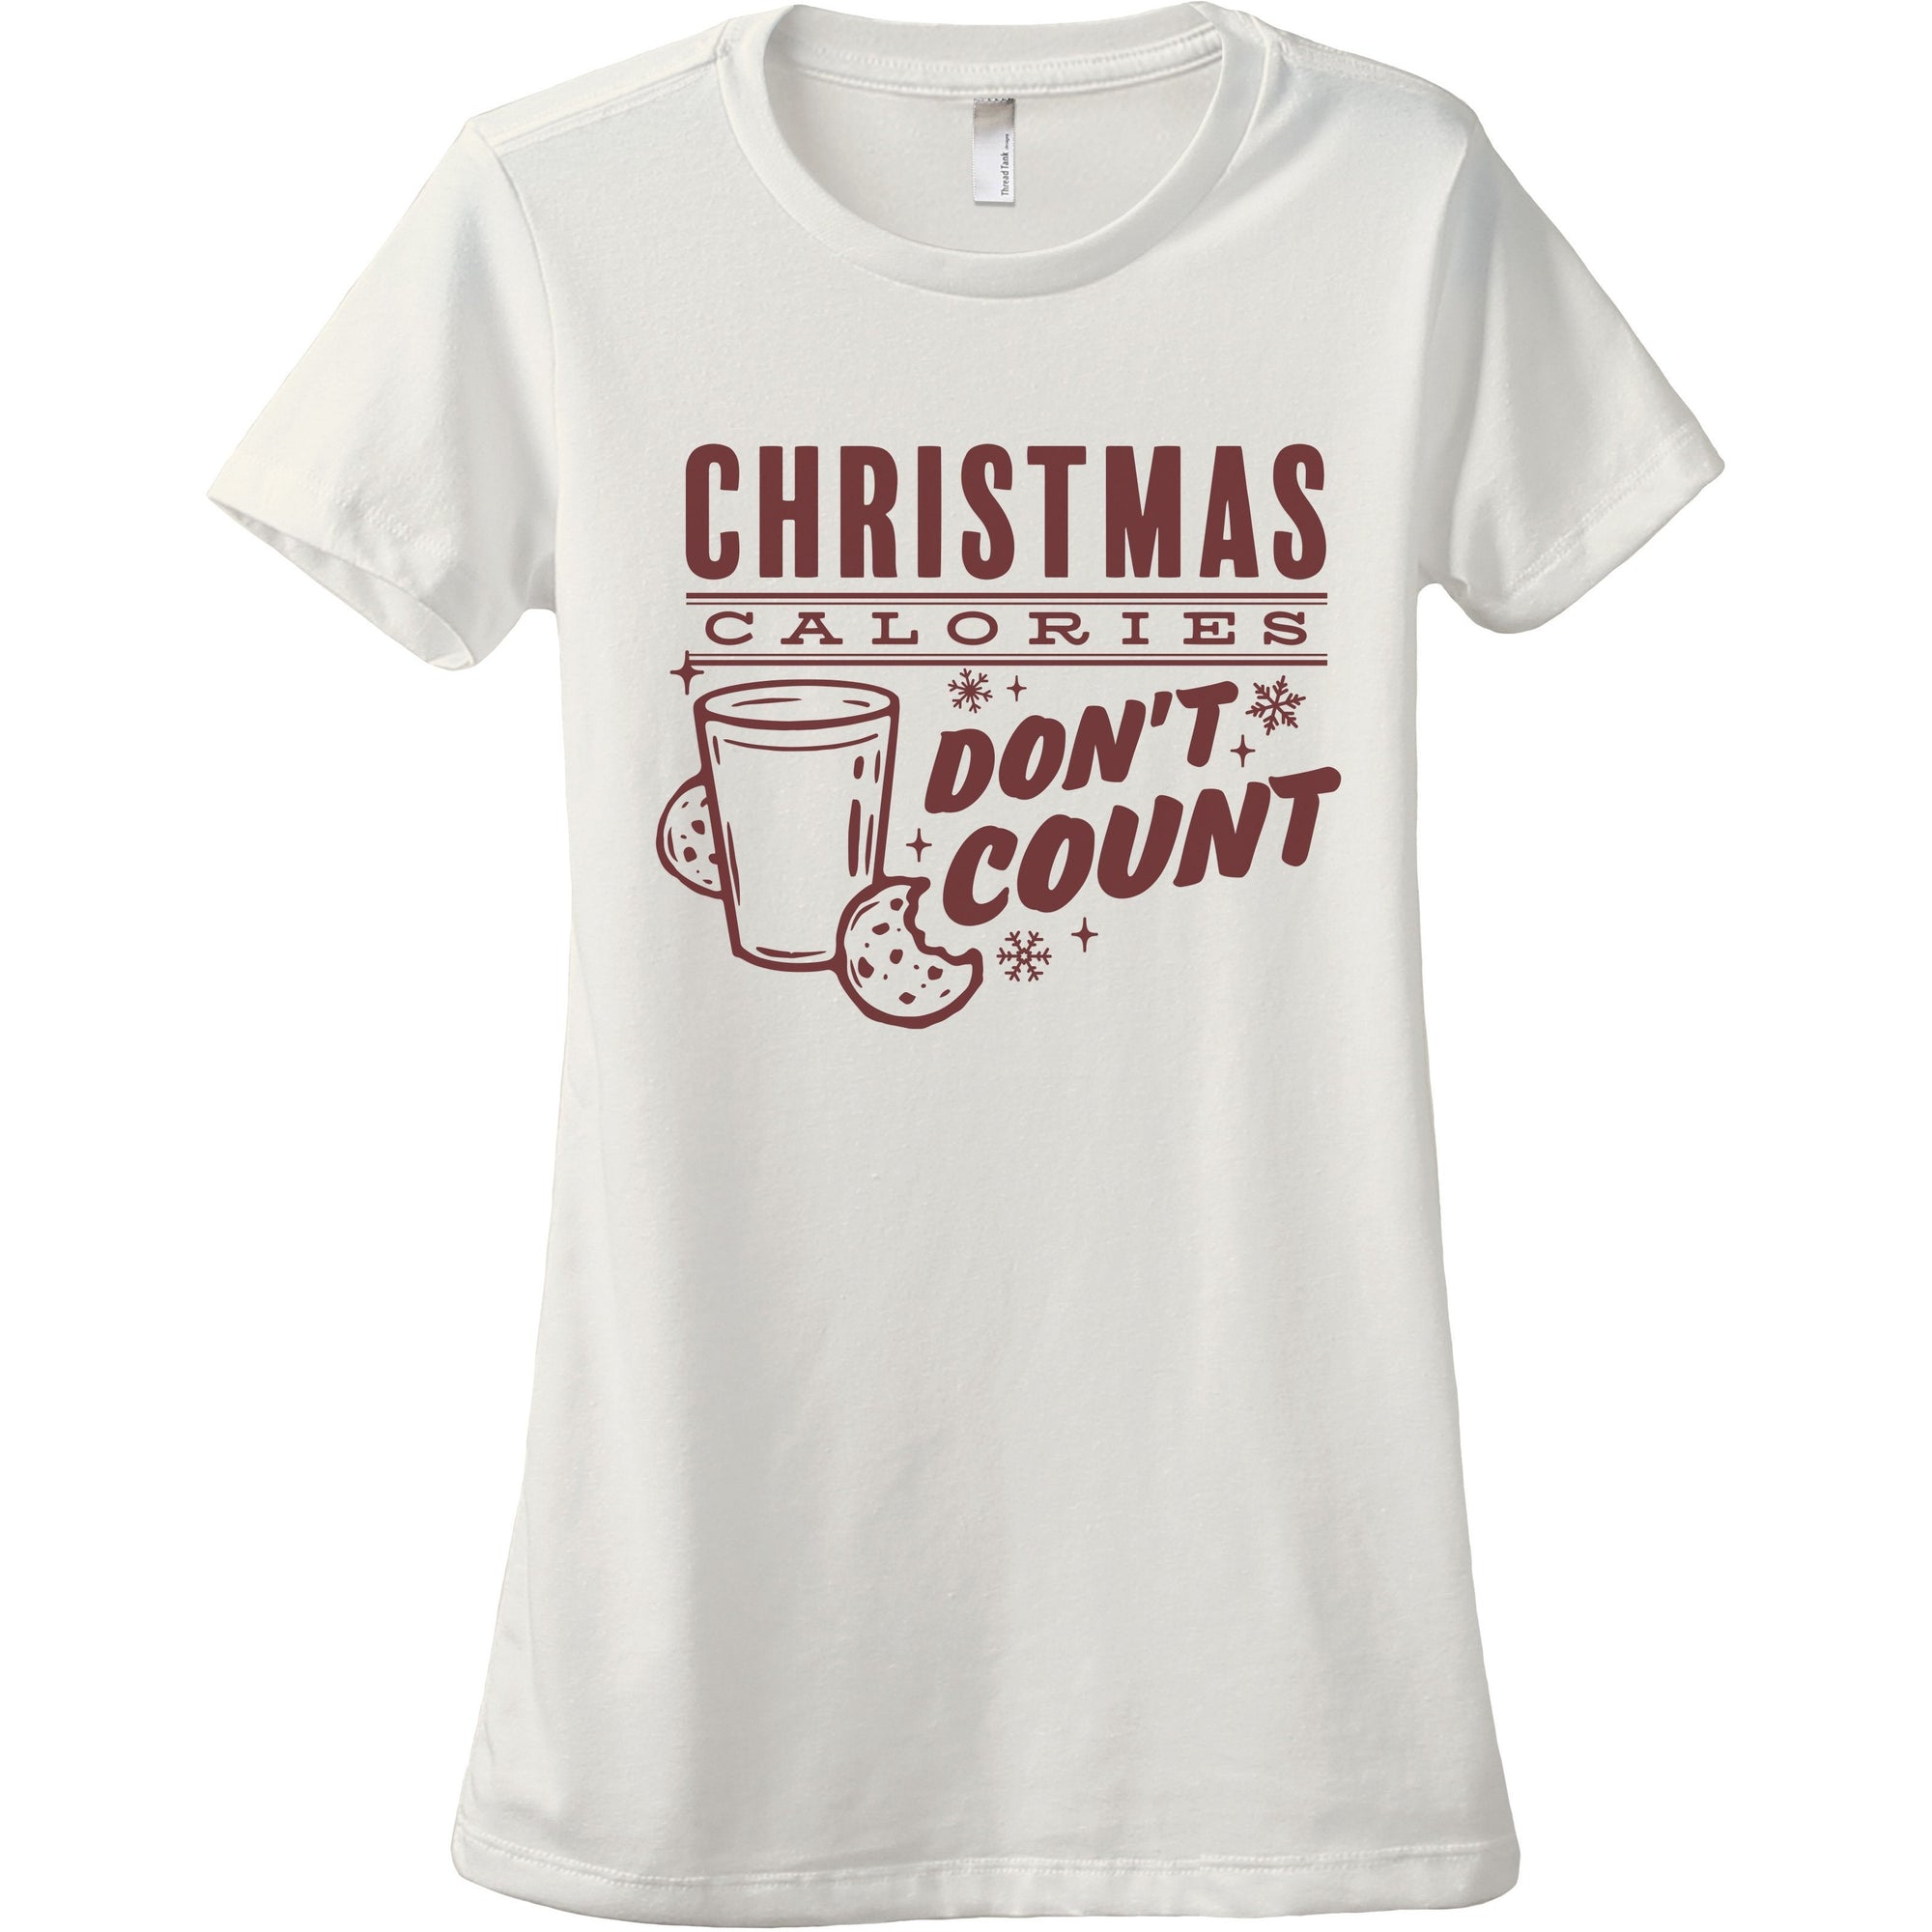 Christmas Calories Don't Count Women's Relaxed Crewneck T-Shirt Top Tee Vintage White